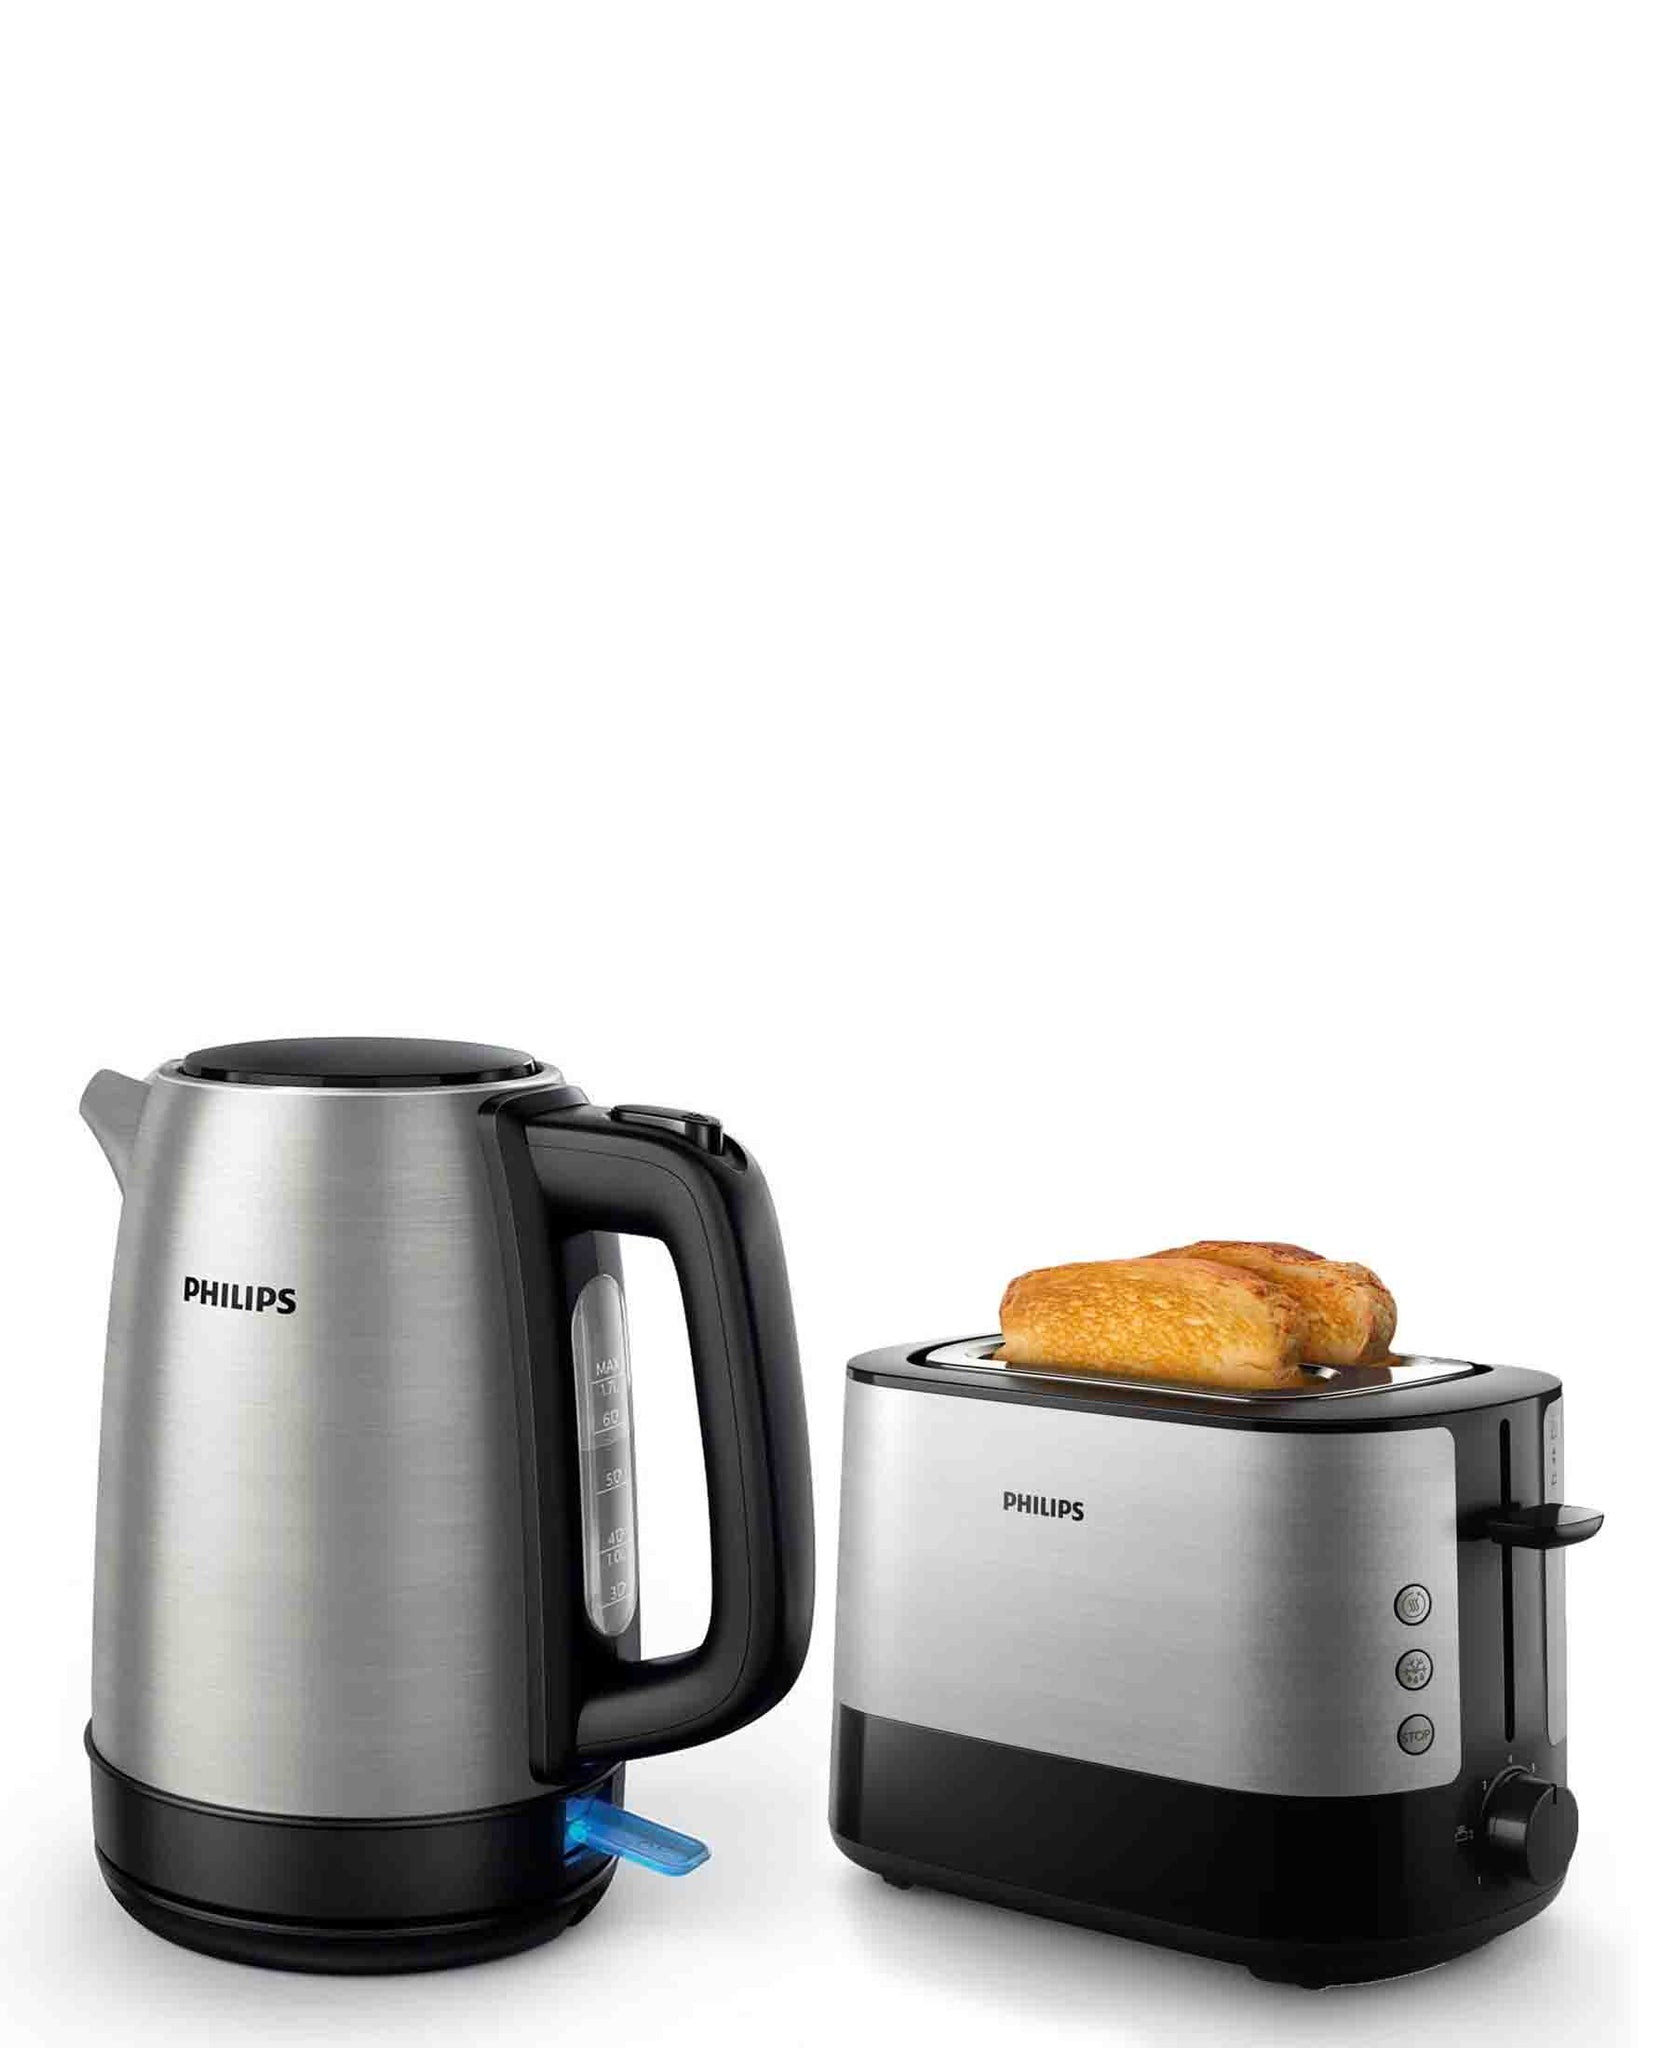 Philips Viva Collection Toaster & Daily Collection Kettle - Silver